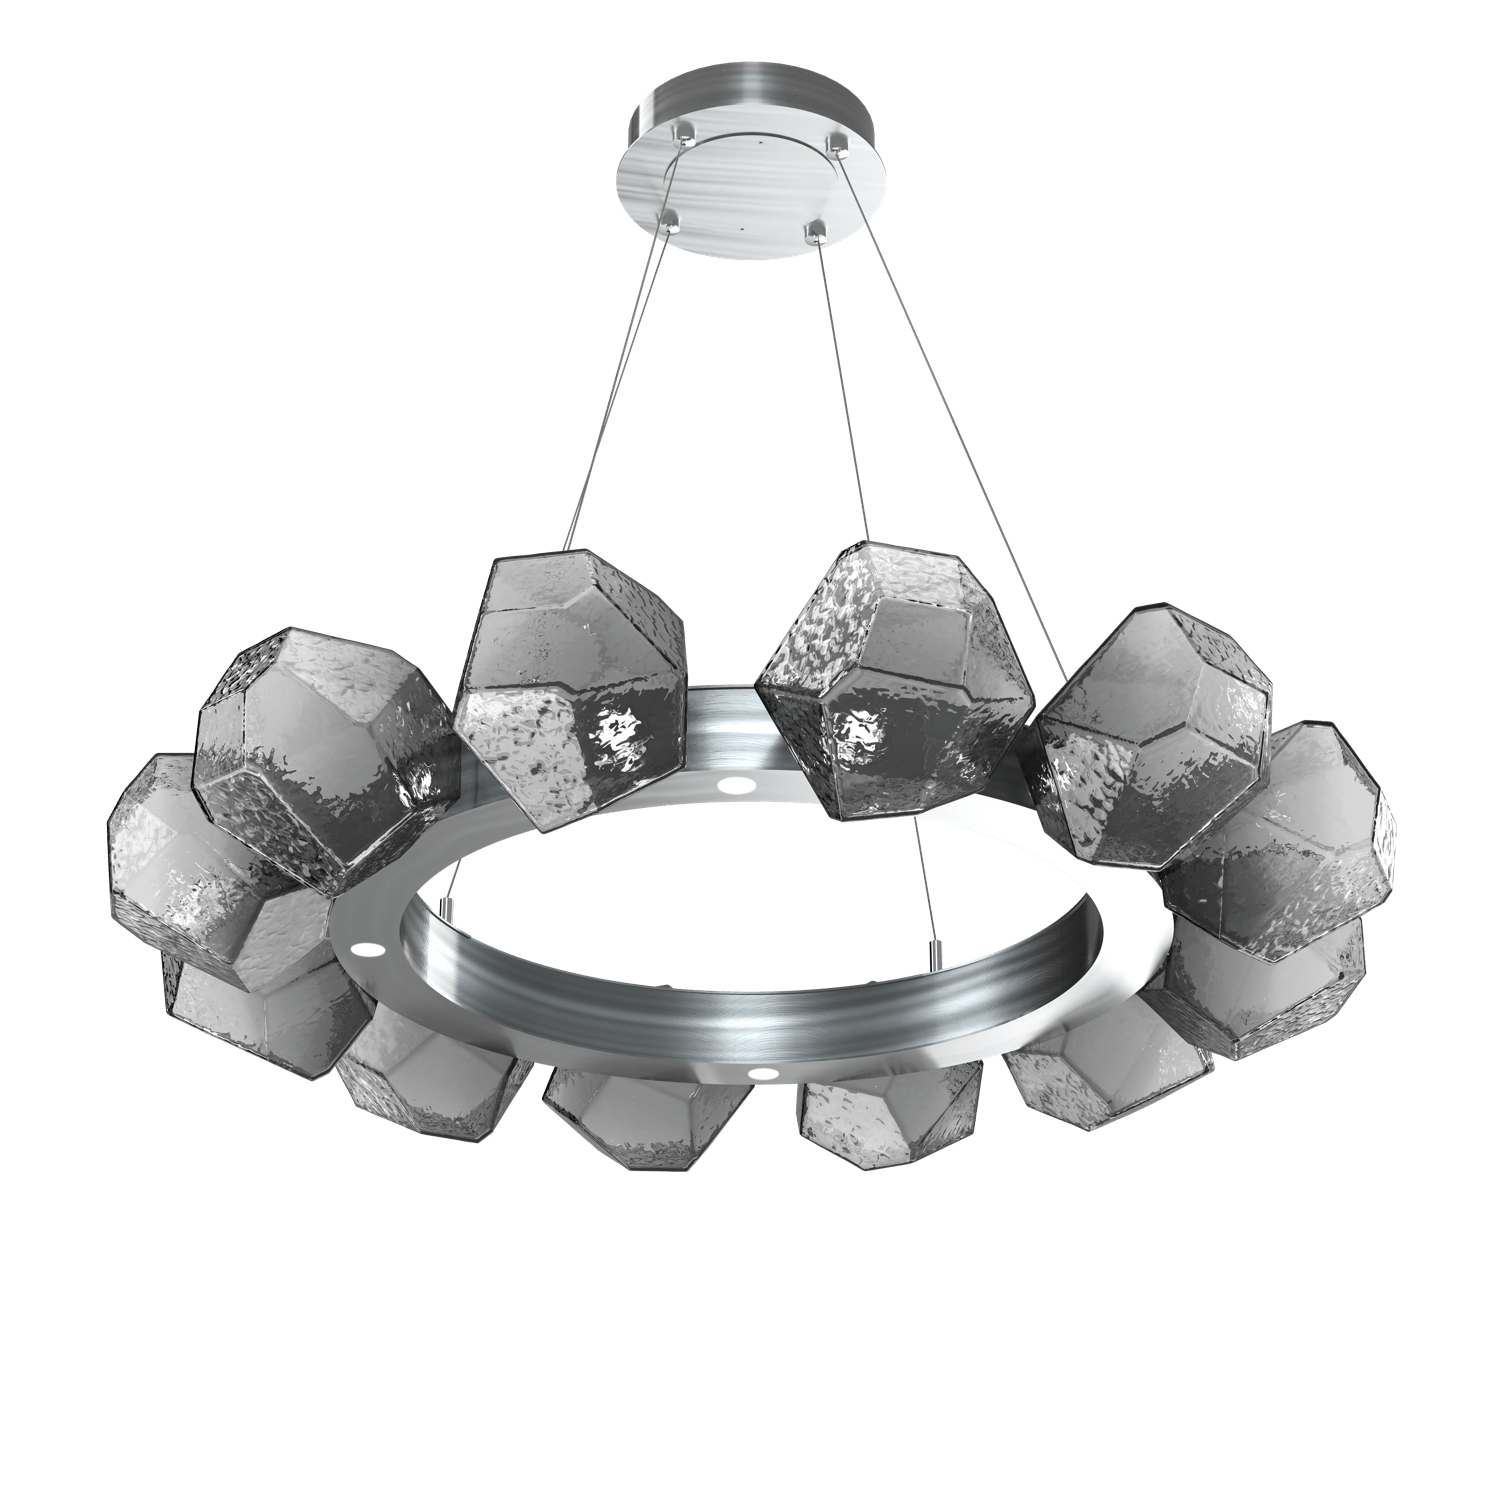 CHB0039-36-SN-S-Hammerton-Studio-Gem-36-inch-radial-ring-chandelier-with-satin-nickel-finish-and-smoke-blown-glass-shades-and-LED-lamping